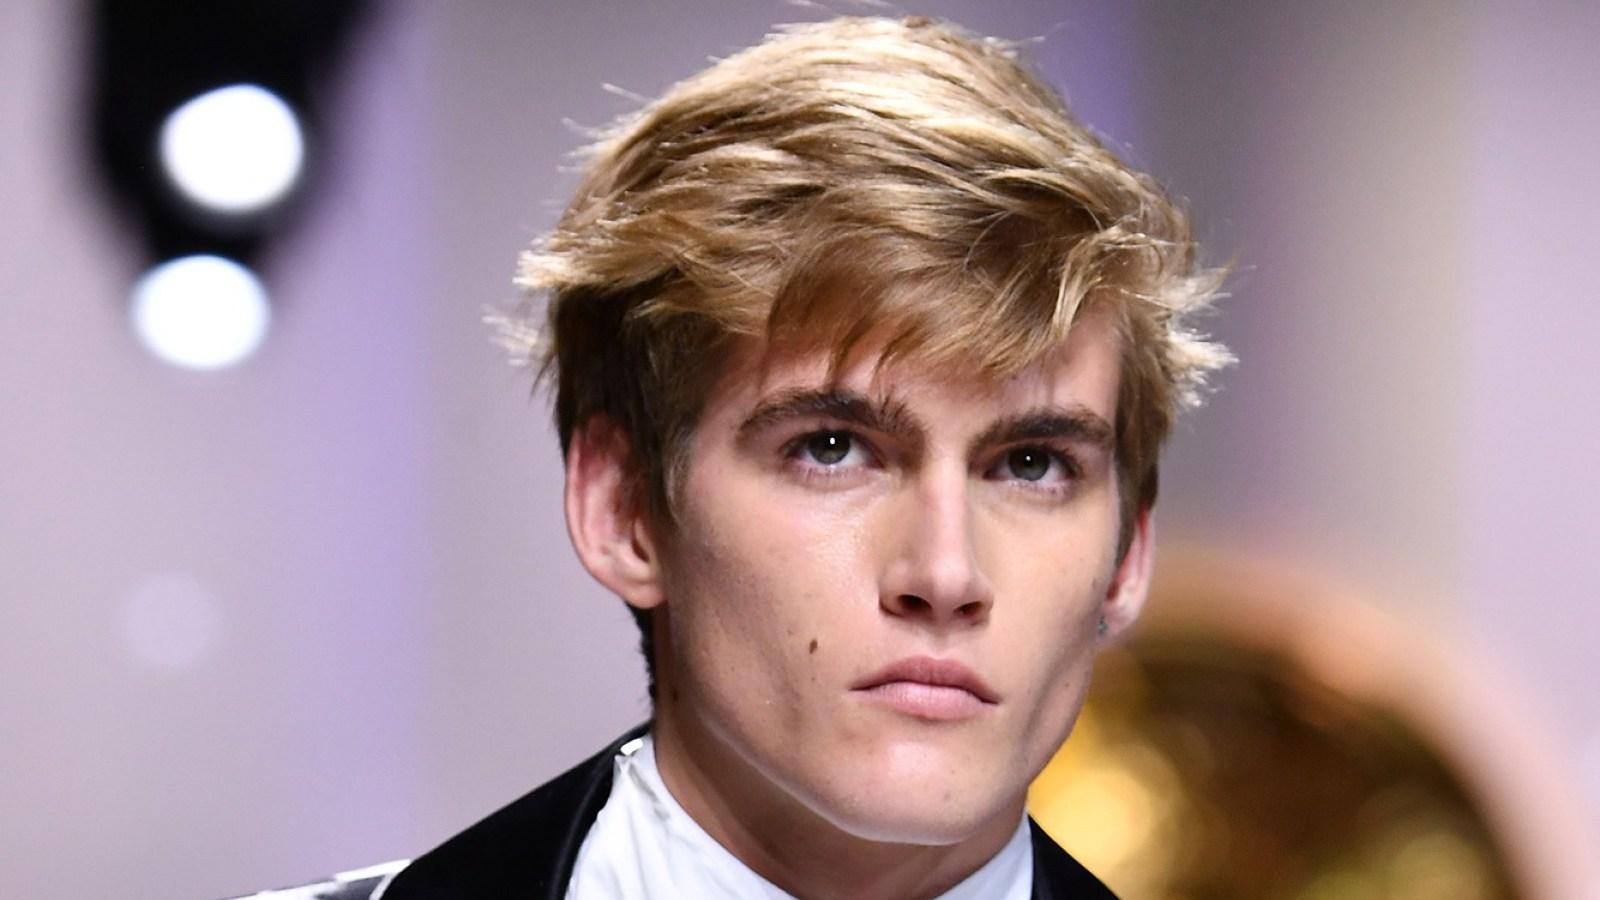 Cindy Crawford's Son Presley Gerber Charged With DUI